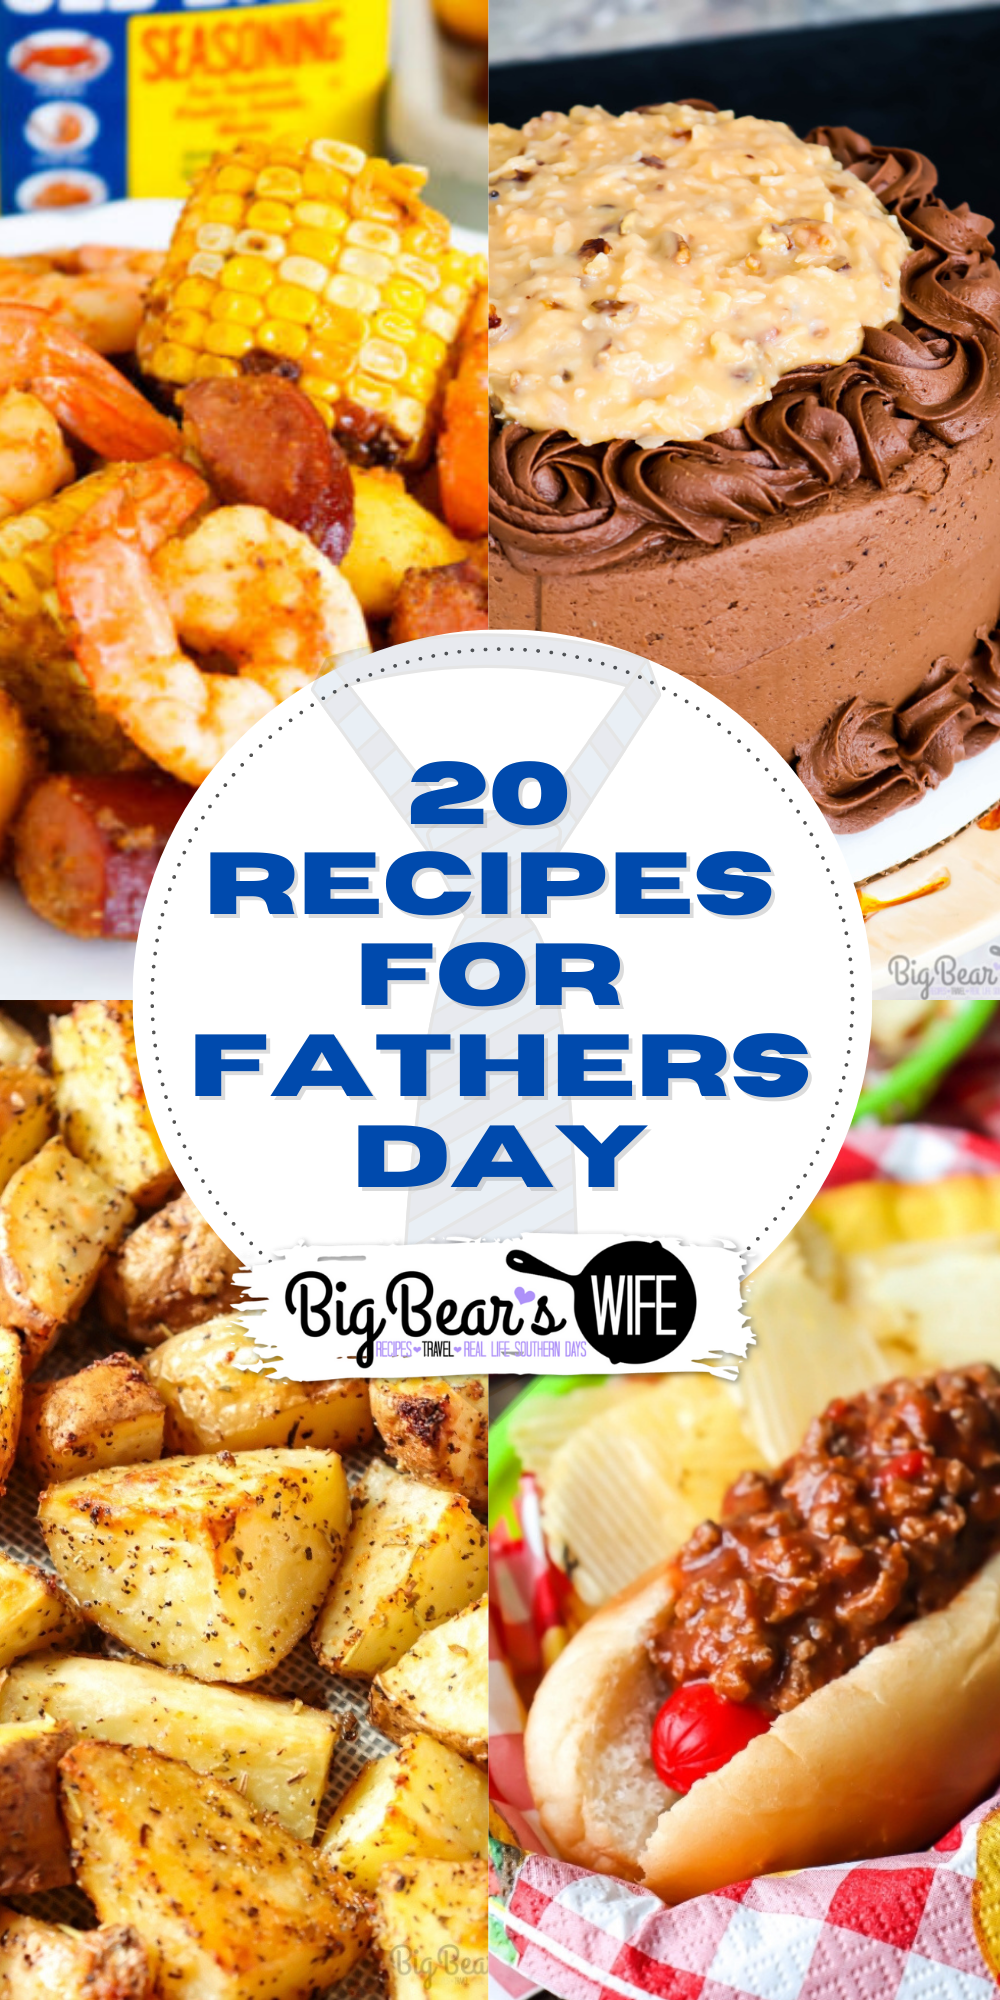 Father's Day 2021 is Sunday, June 20, 2021! I've gathered up some great recipes that are perfect for Father's Day! From Breakfast, to lunch to dinner and dessert, you're sure to find something delicious in this list that dad would love with these awesome Fathers Day Recipes! via @bigbearswife